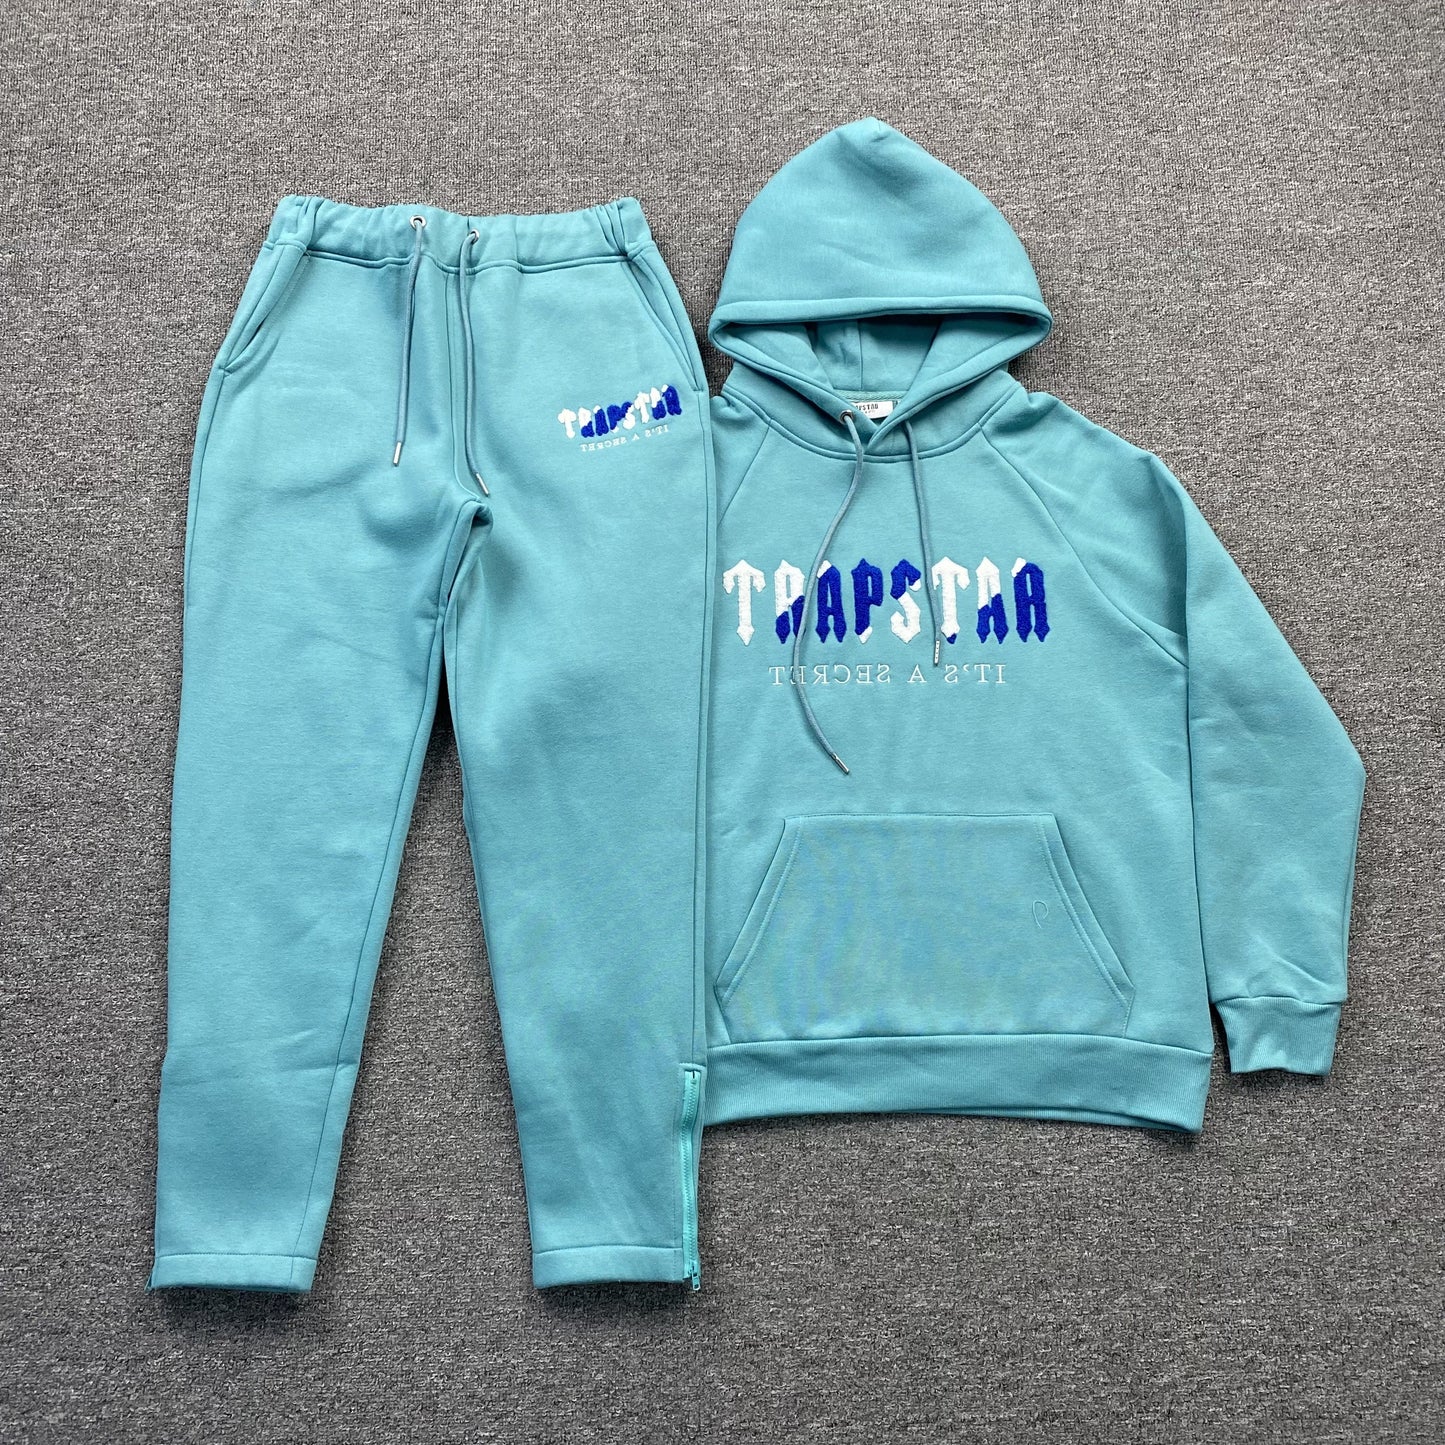 Trapstar Hoodie and Pants - 2